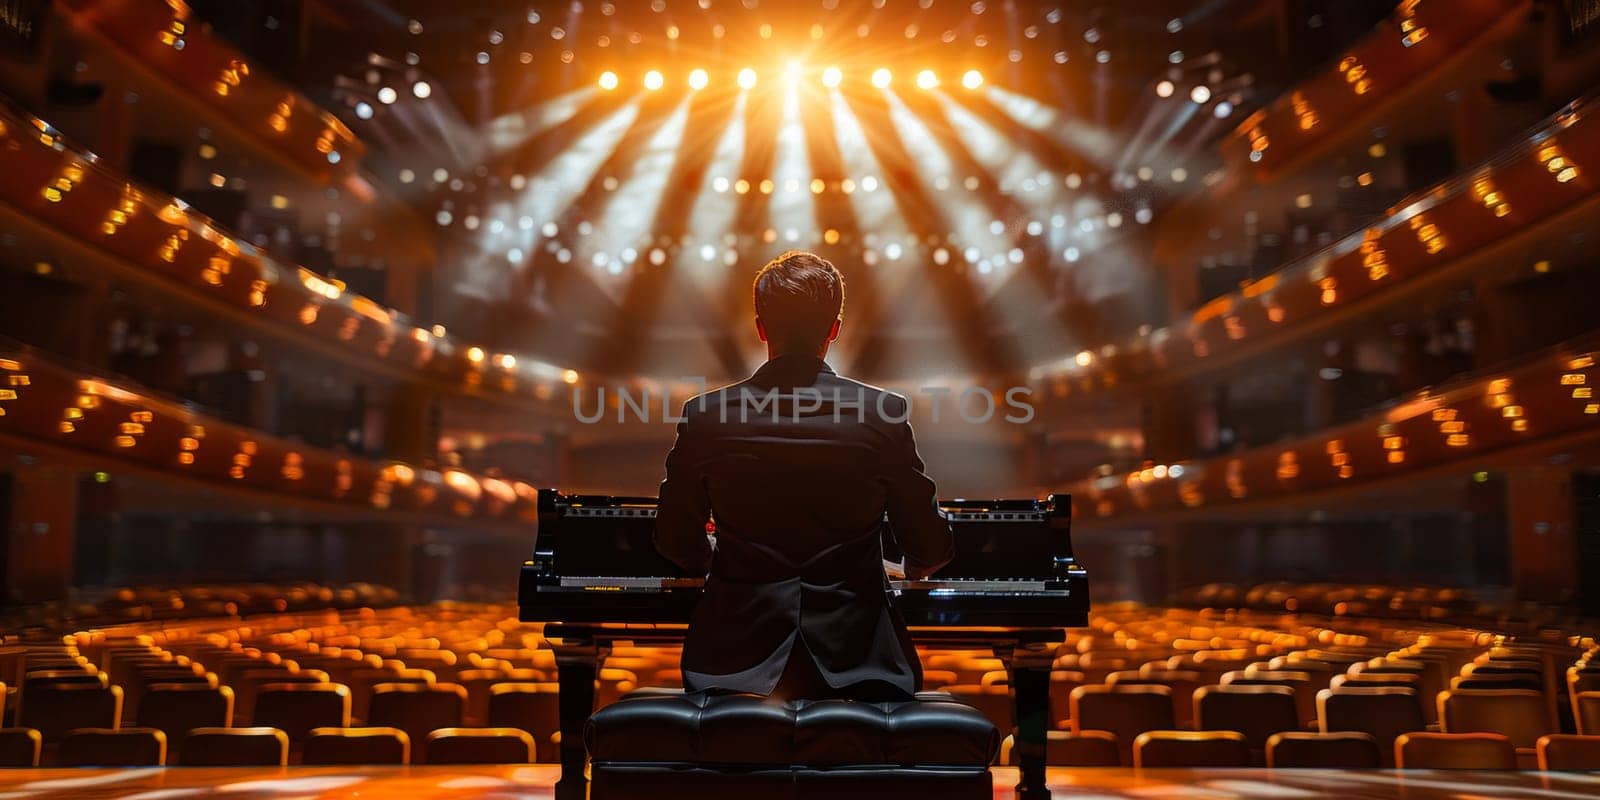 A man with intense concentration sits at a grand piano in front of a dimly lit stage, preparing to play a soulful composition.